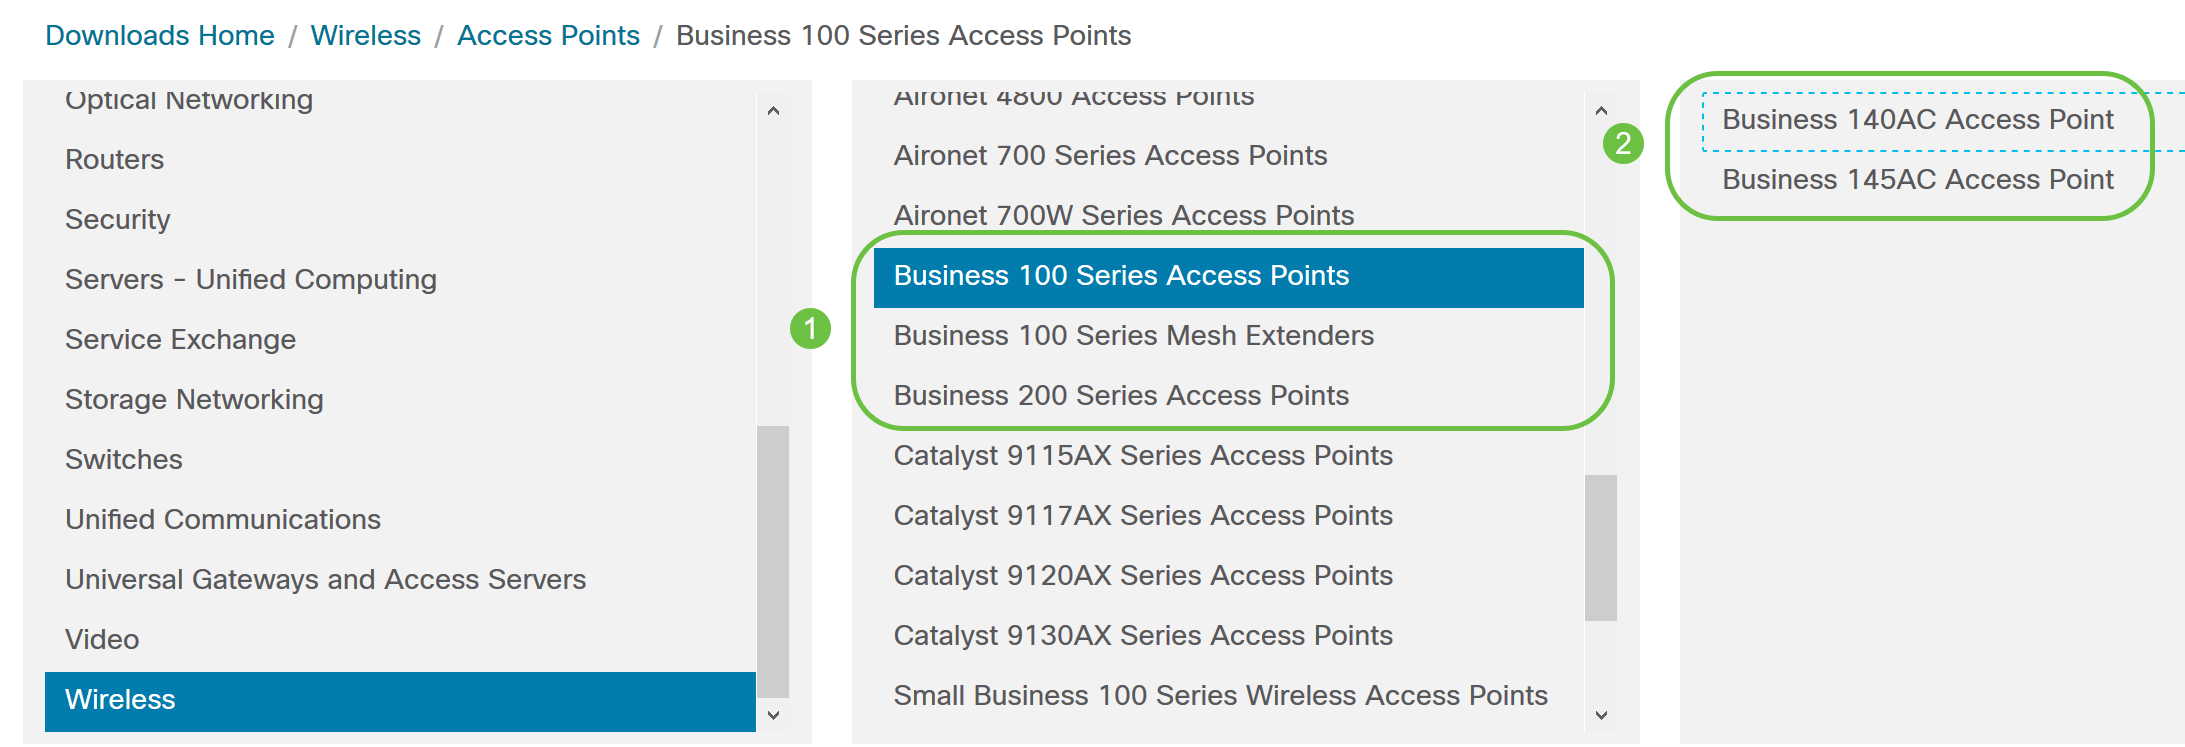 Based on your AP model, navigate to Cisco Business 100 Series Access Points/Cisco Business 200 Series Access Points and select one model of the models: 140AC/145AC/240AC. 